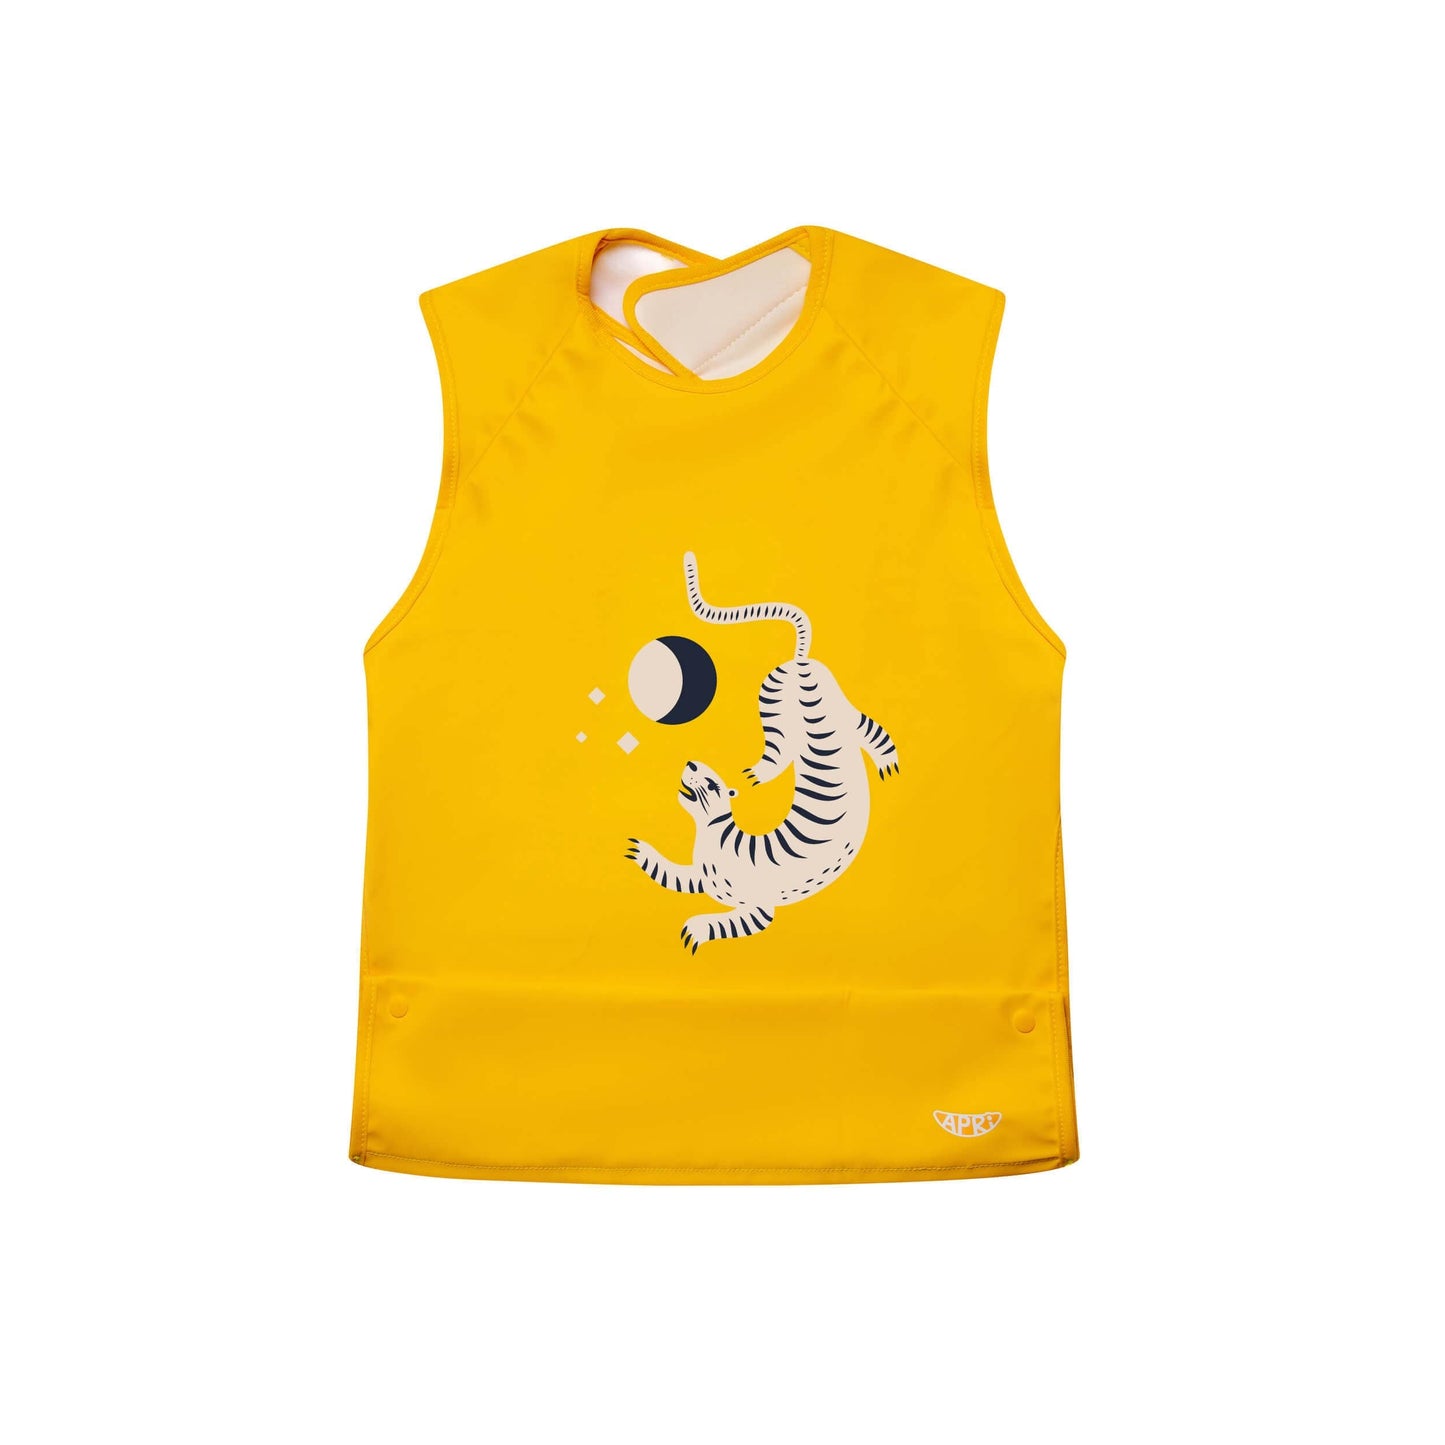 Special needs Apri bib for kids, teens and adults. Yellow cap-sleeve with leopard design and food collection pocket